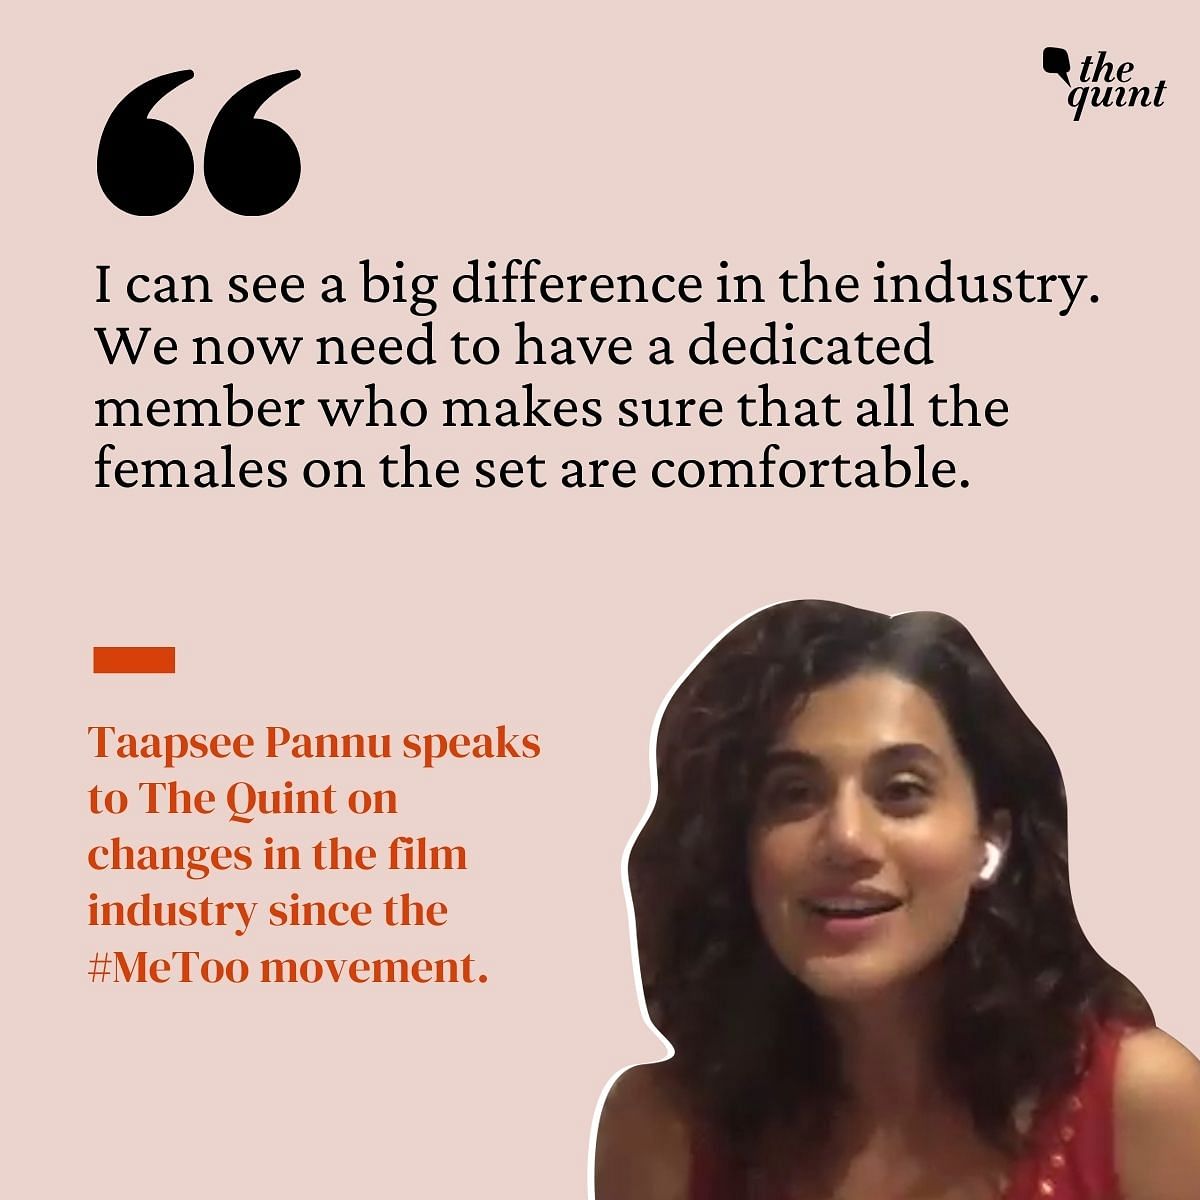 Here’s Taapsee Pannu in an exclusive chat with The Quint.